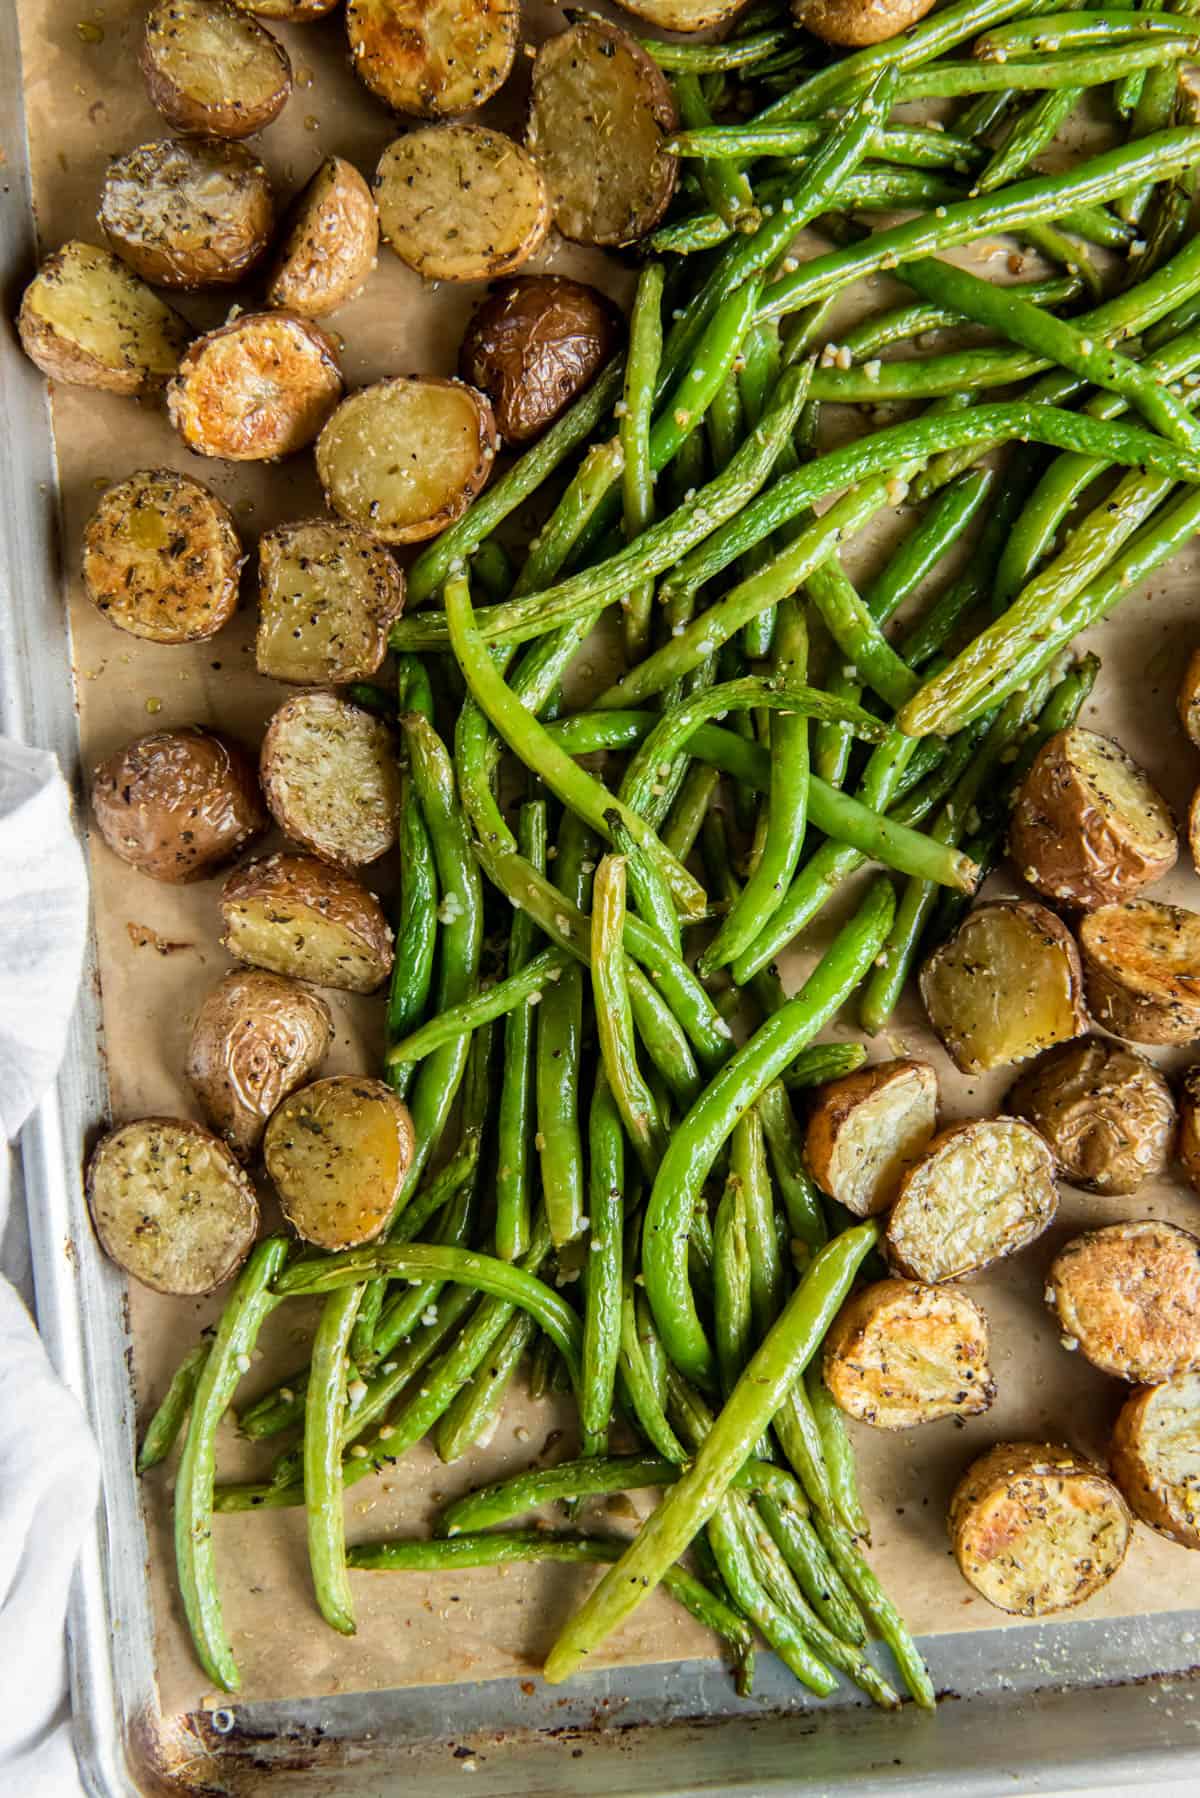 A sheet pan with roasted green beans and potatoes sitting on a white countertop after coming out of the oven.